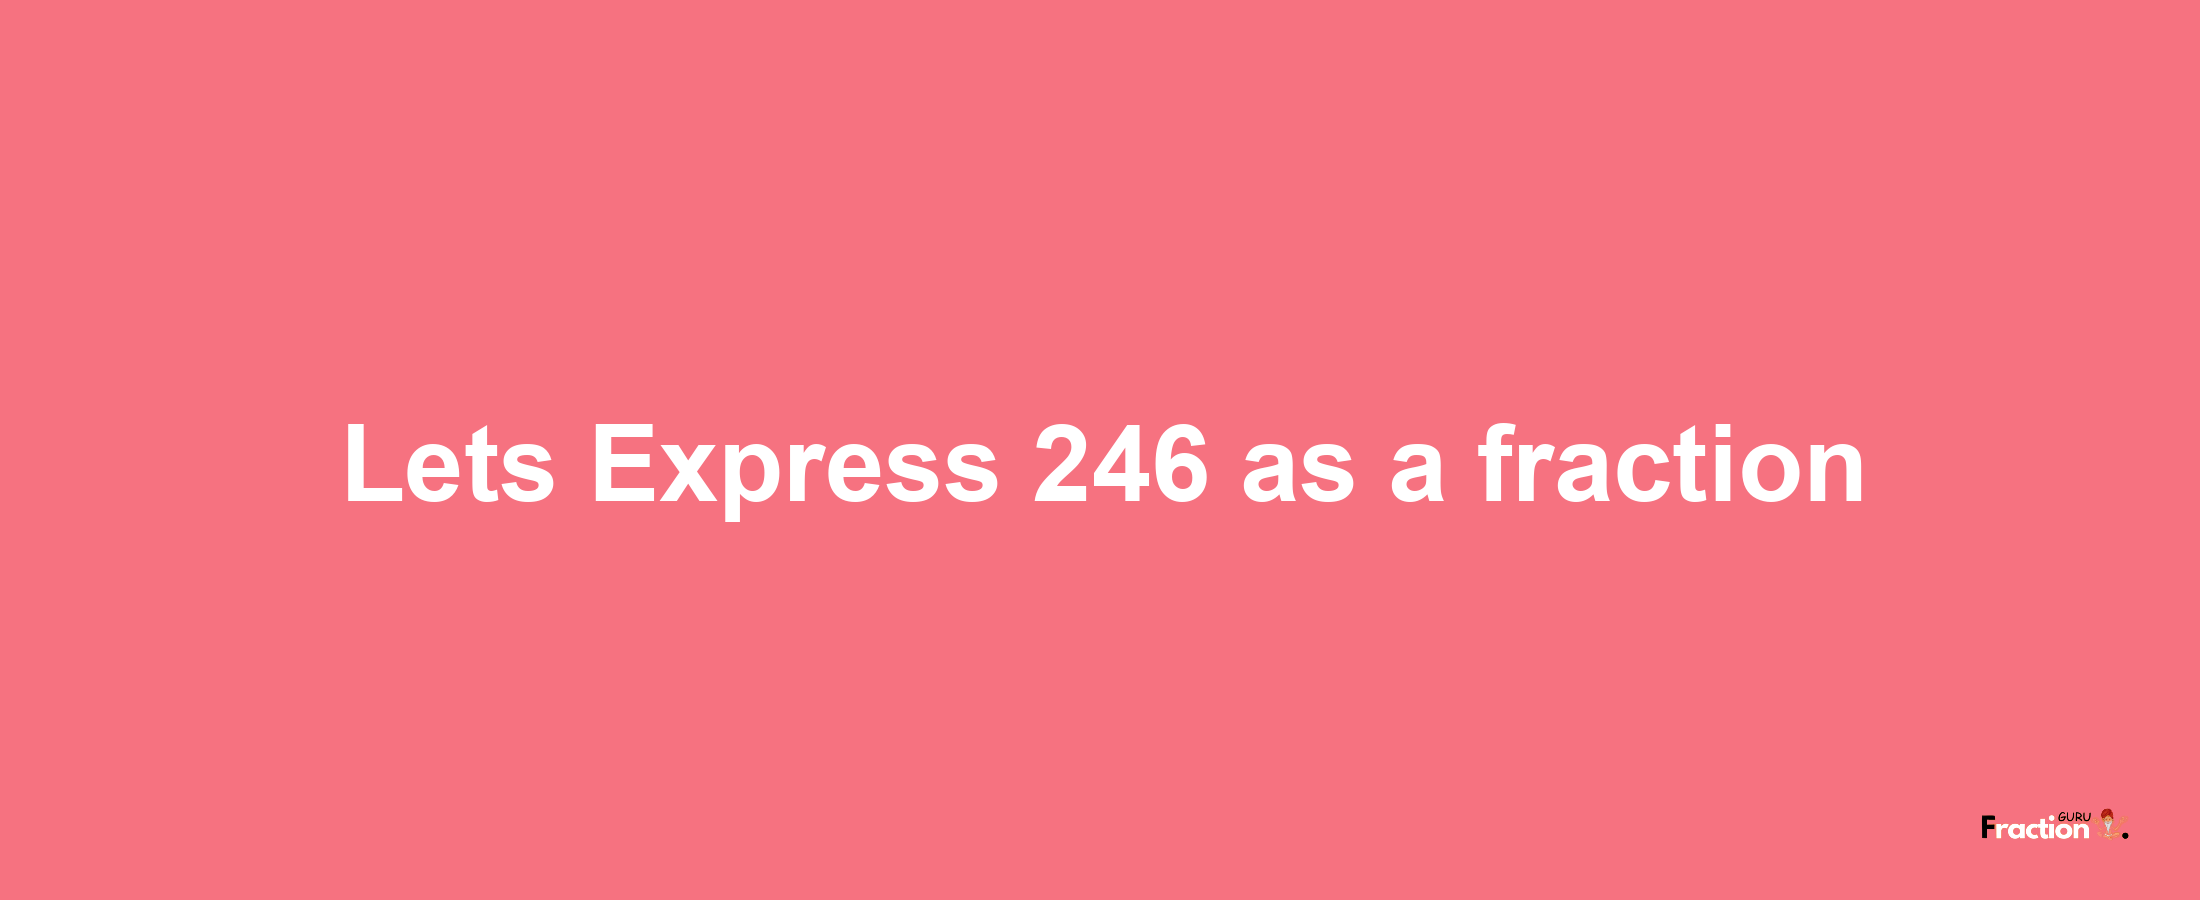 Lets Express 246 as afraction